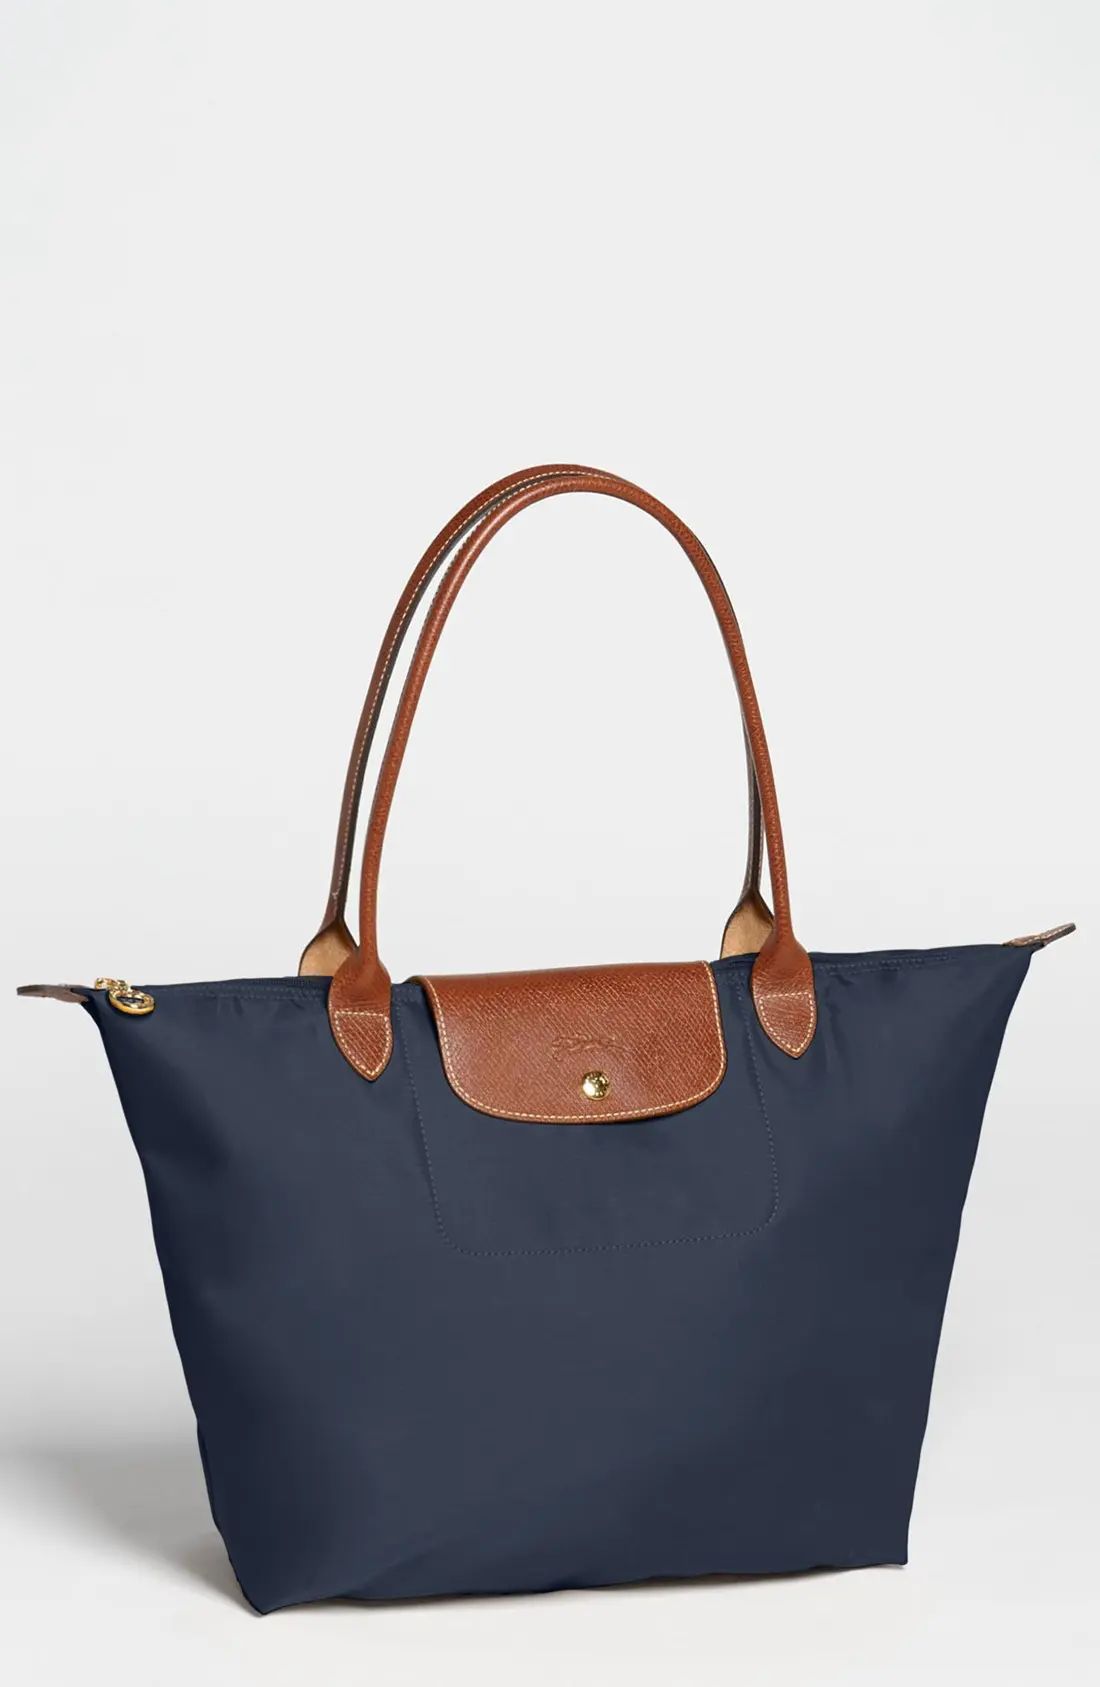 'Large Le Pliage' Tote | Nordstrom